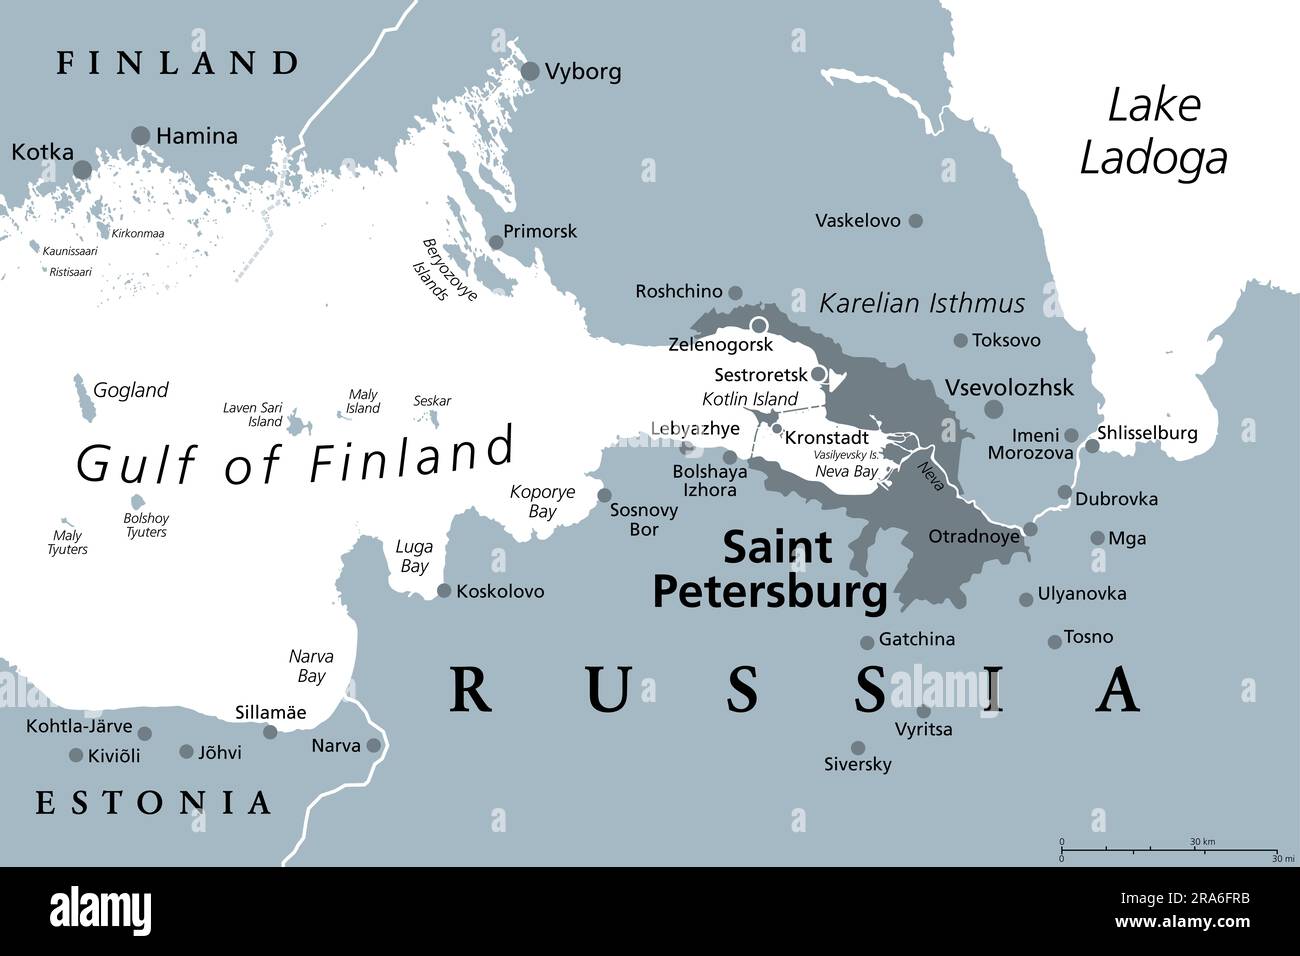 Saint Petersburg area, gray political map. Second-largest city in Russia, formerly known as Petrograd and later Leningrad. Situated on the Neva River. Stock Photo